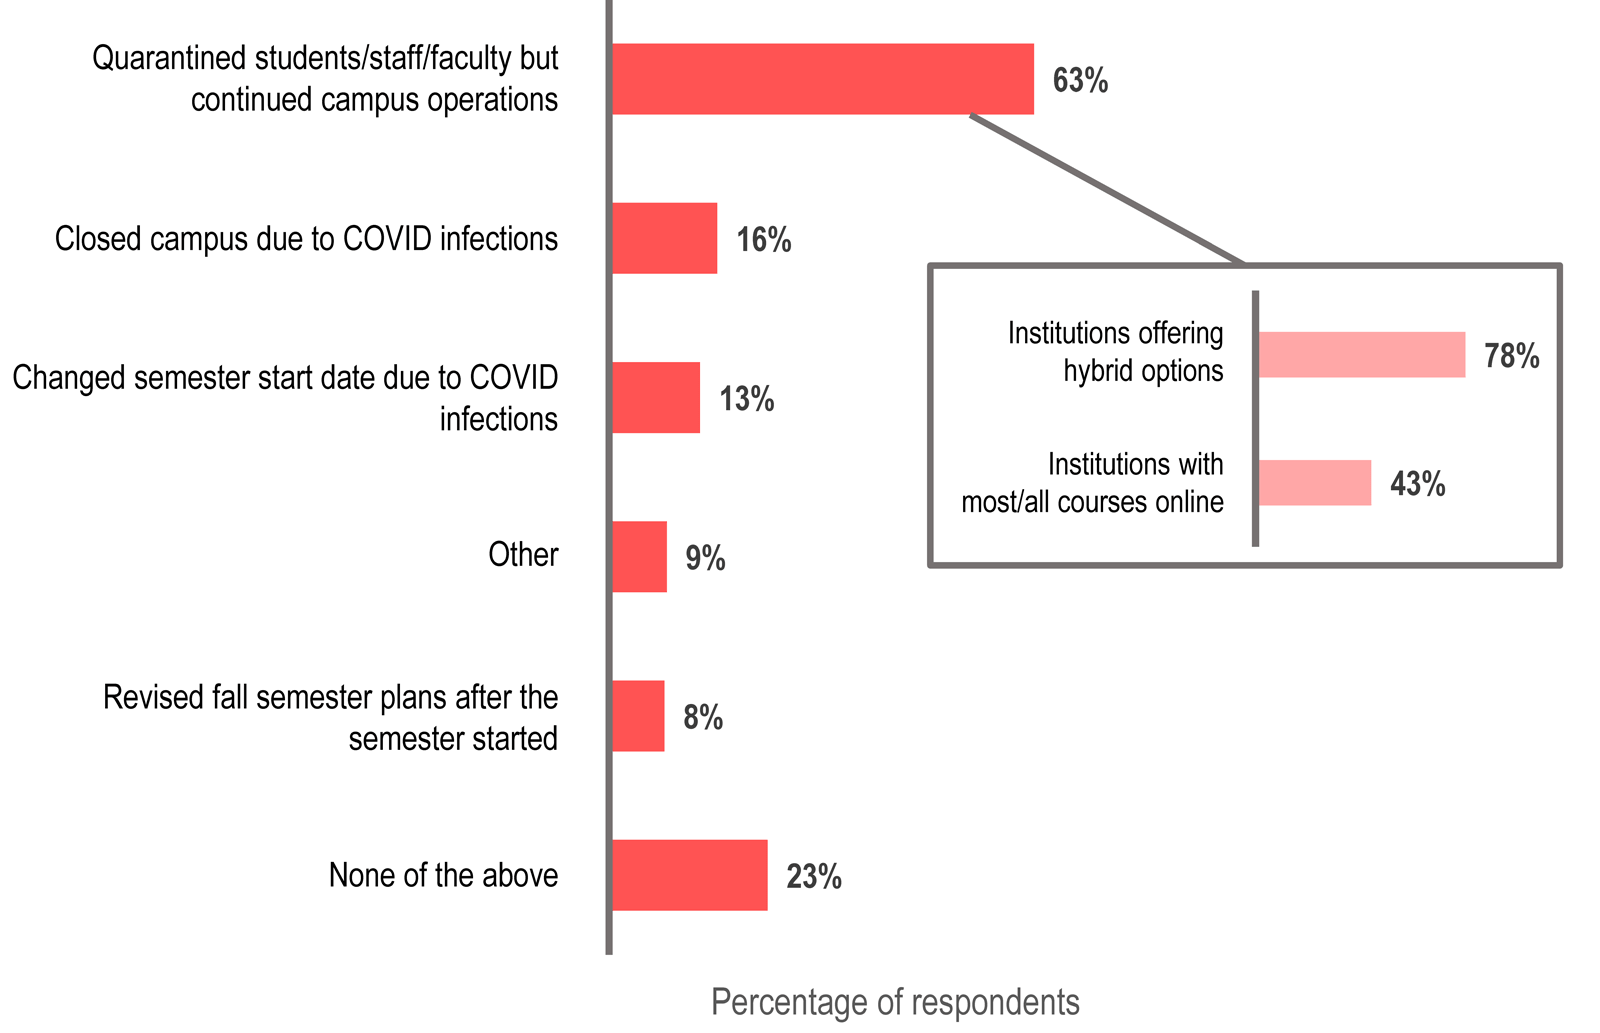 Bar graph showing the percentage of respondents in each category.
Quarantined students/staff/faculty but continued campus operations 63% (of these: Institutions offering hybrid options 78%; Institutions with most/all courses online 43%).
Closed campus due to COVID infections 16%.
Changed semester start date due to COVID infections 13%.
Other 9%.
Revised fall semester plans after the semester started 8%.
None of the above 23%.